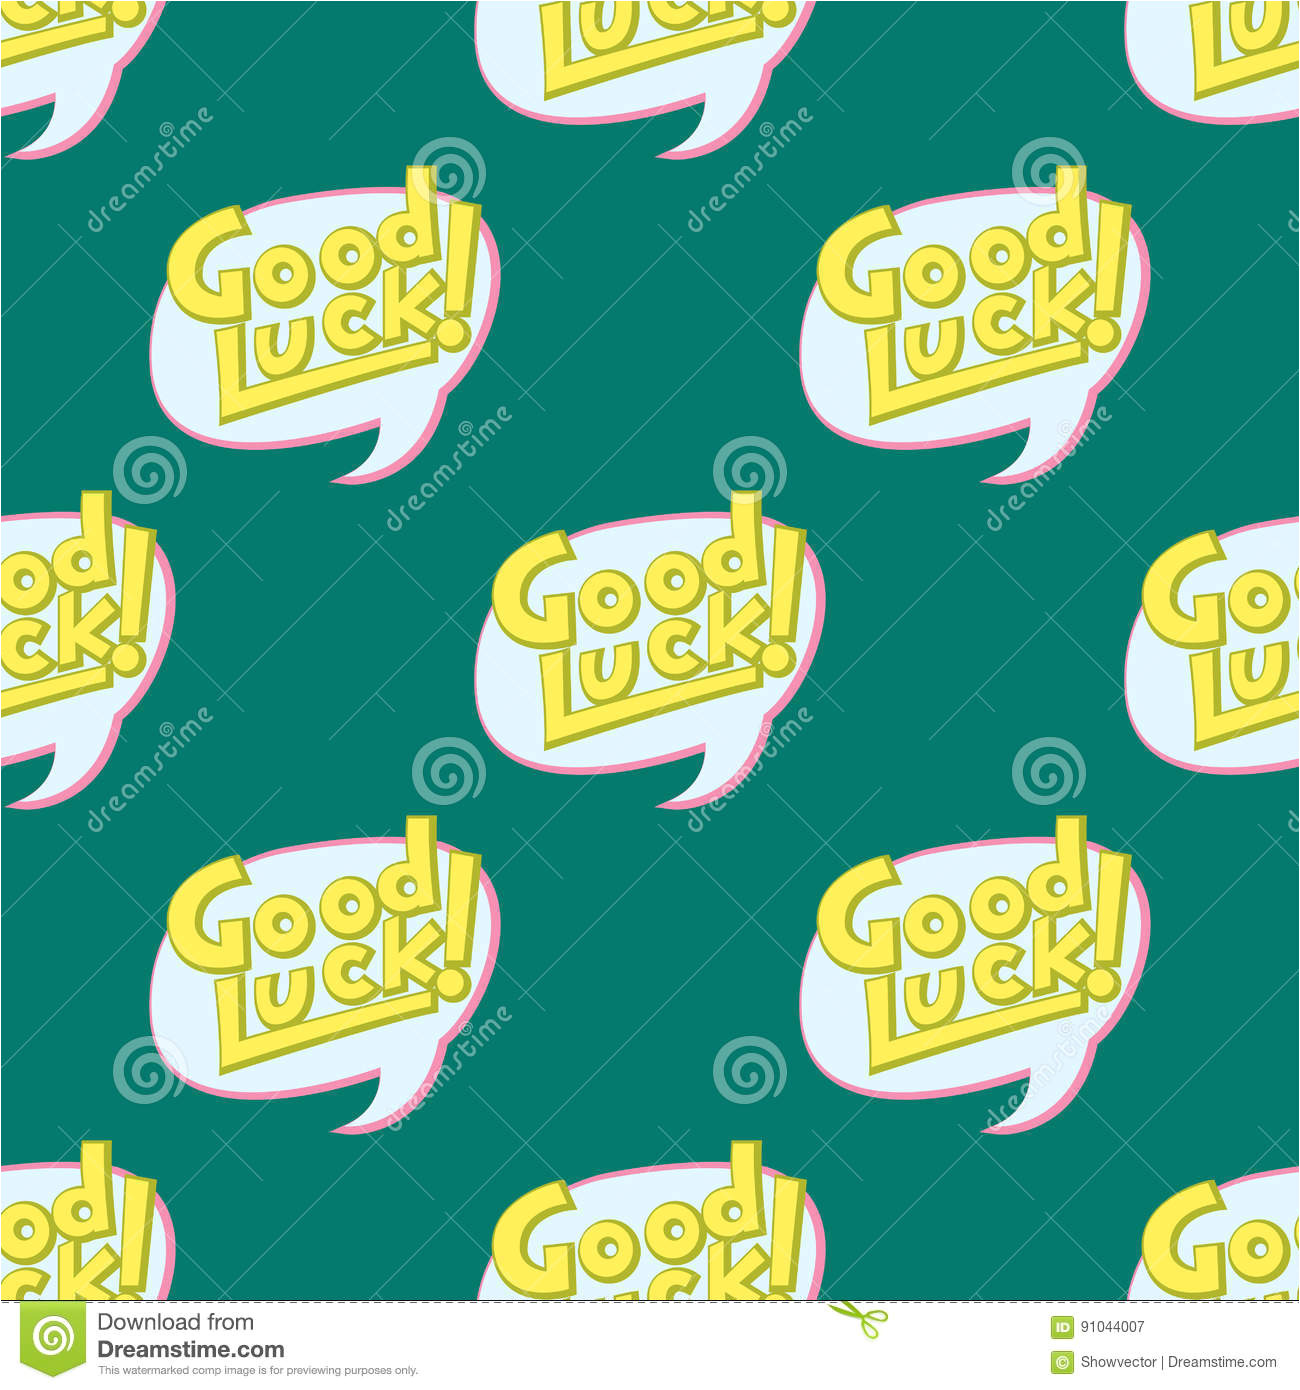 good luck seamless pattern farewell vector lettering lucky phrase background greeting typography vintage word decorative 91044007 jpg